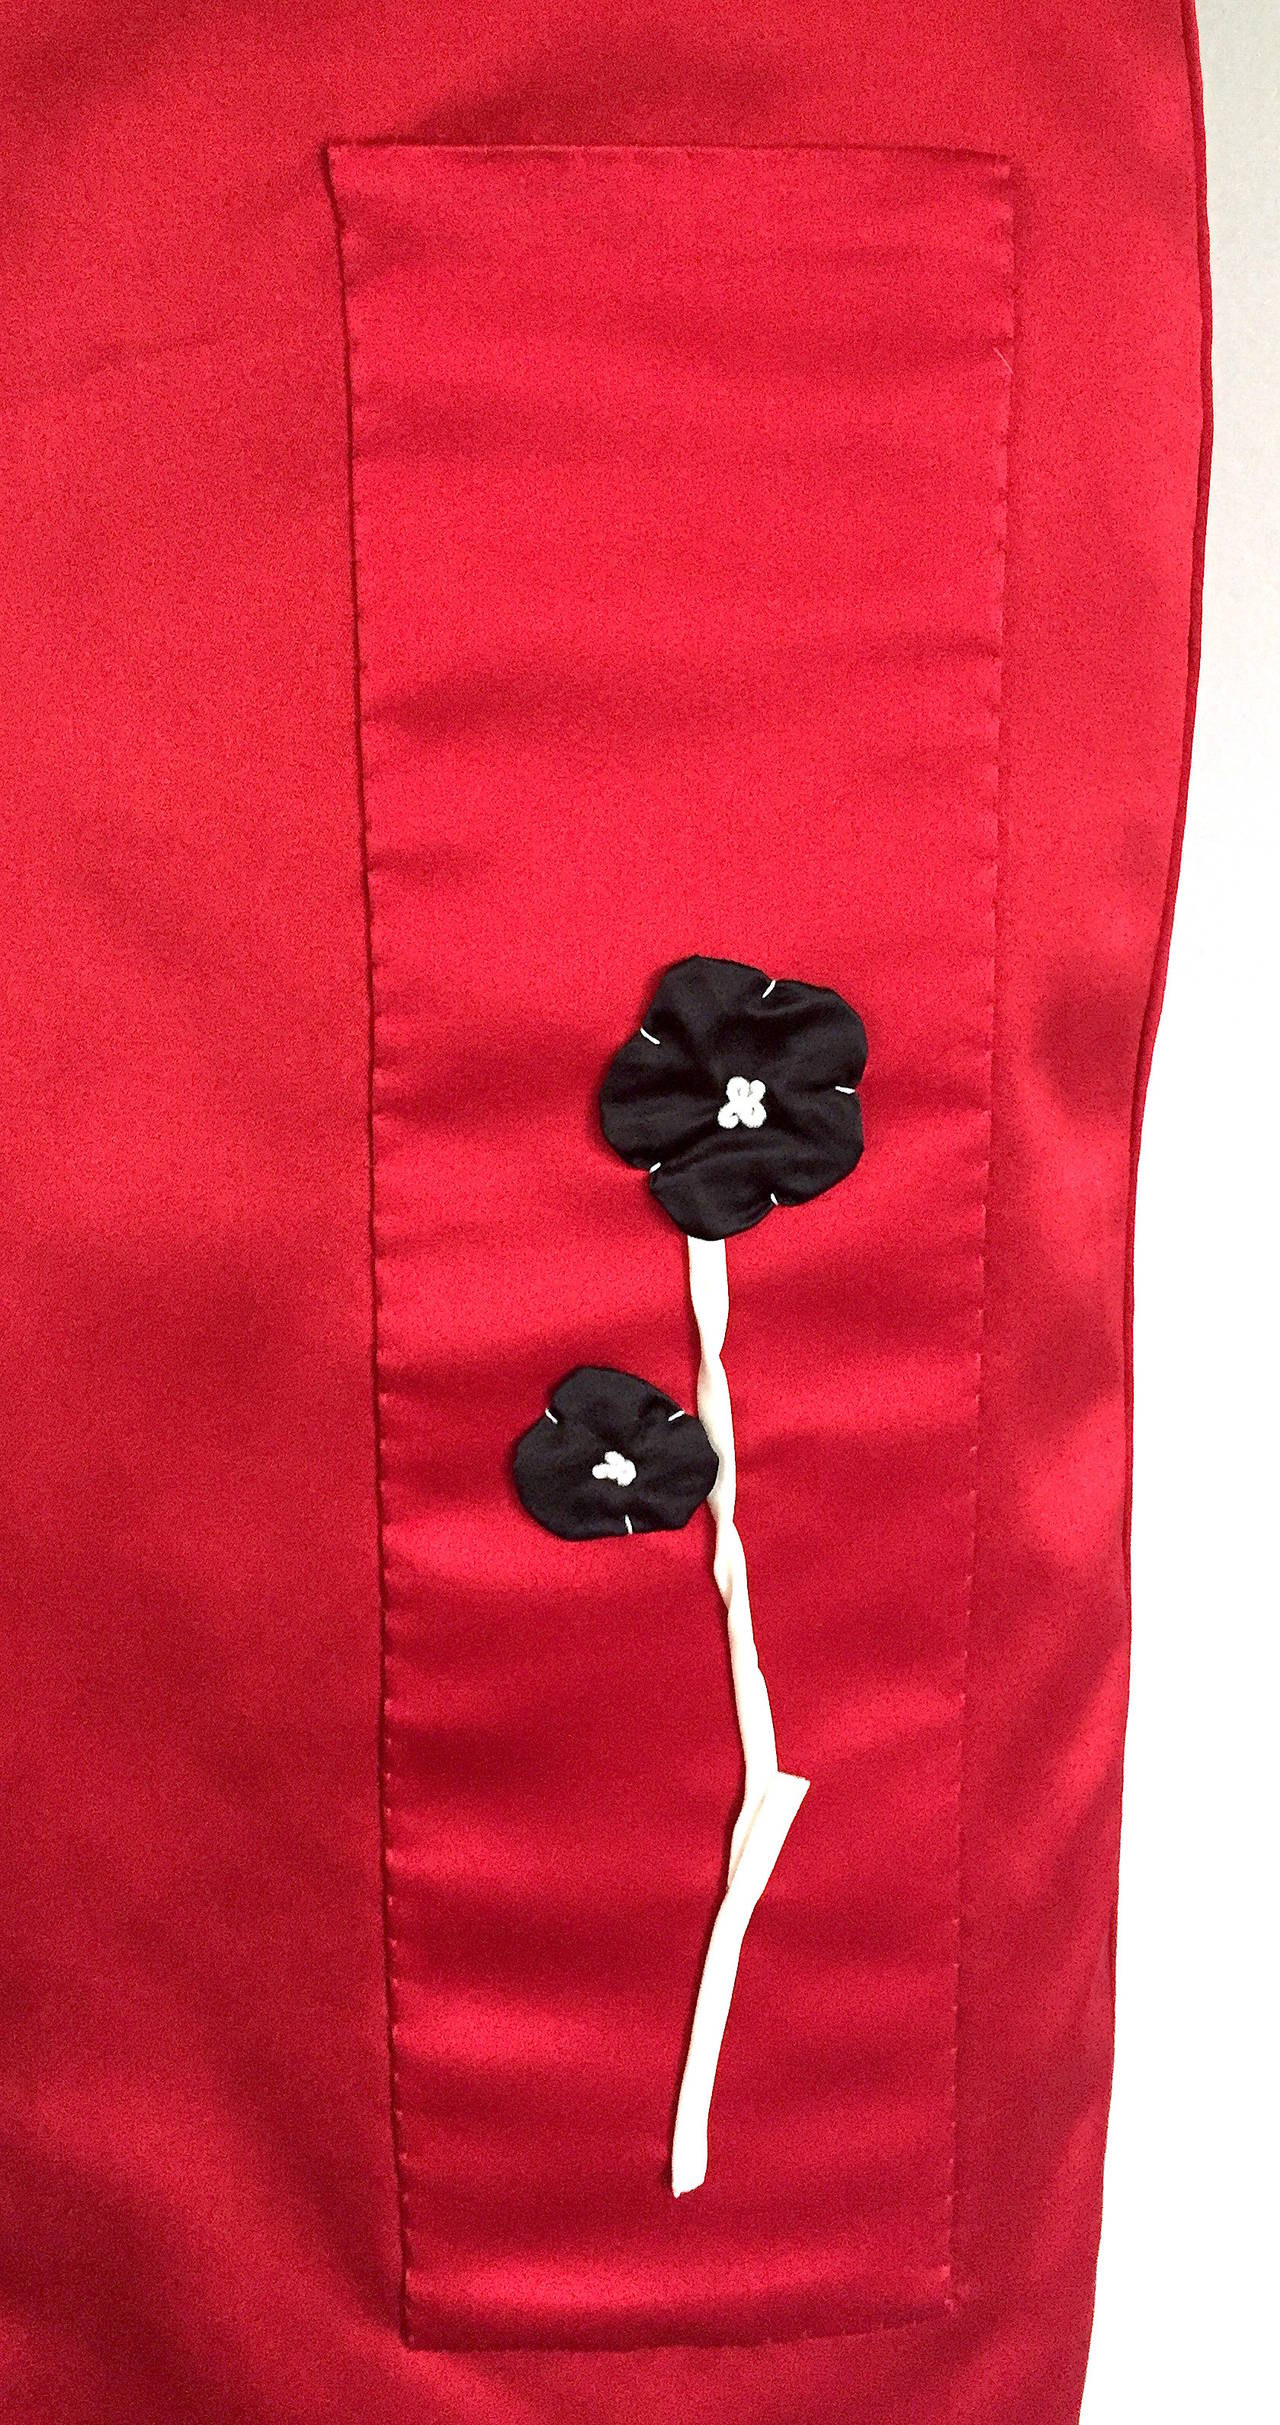 Prada Red Satin Runway Skirt with Flower Applique, IT 40 For Sale 1